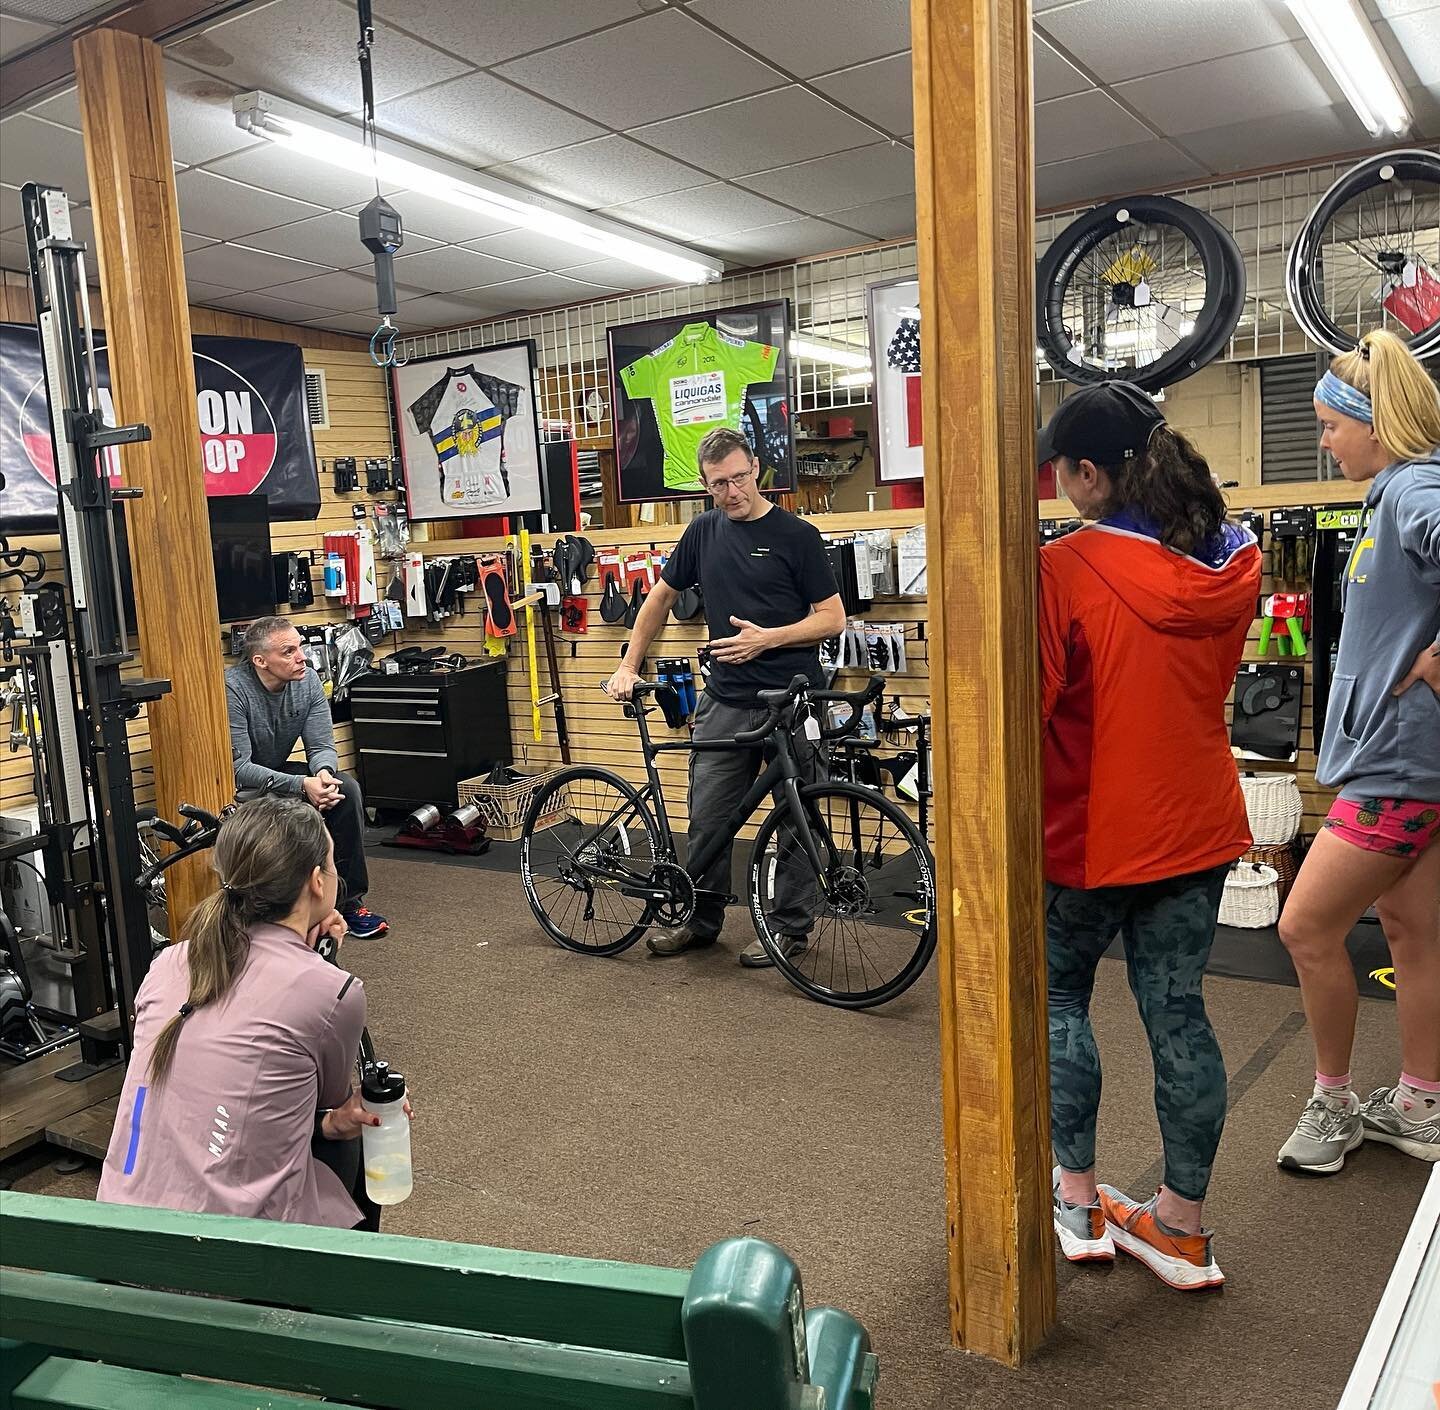 Some tires popped and lessons were learned. 

Everyone left with confidence that they had the tools to fix their flat in an emergency. 

Stay tuned for future clinics like this. 

#bikemechanic #localbikeshop #babylon #triathlon #cycling #commutebybi